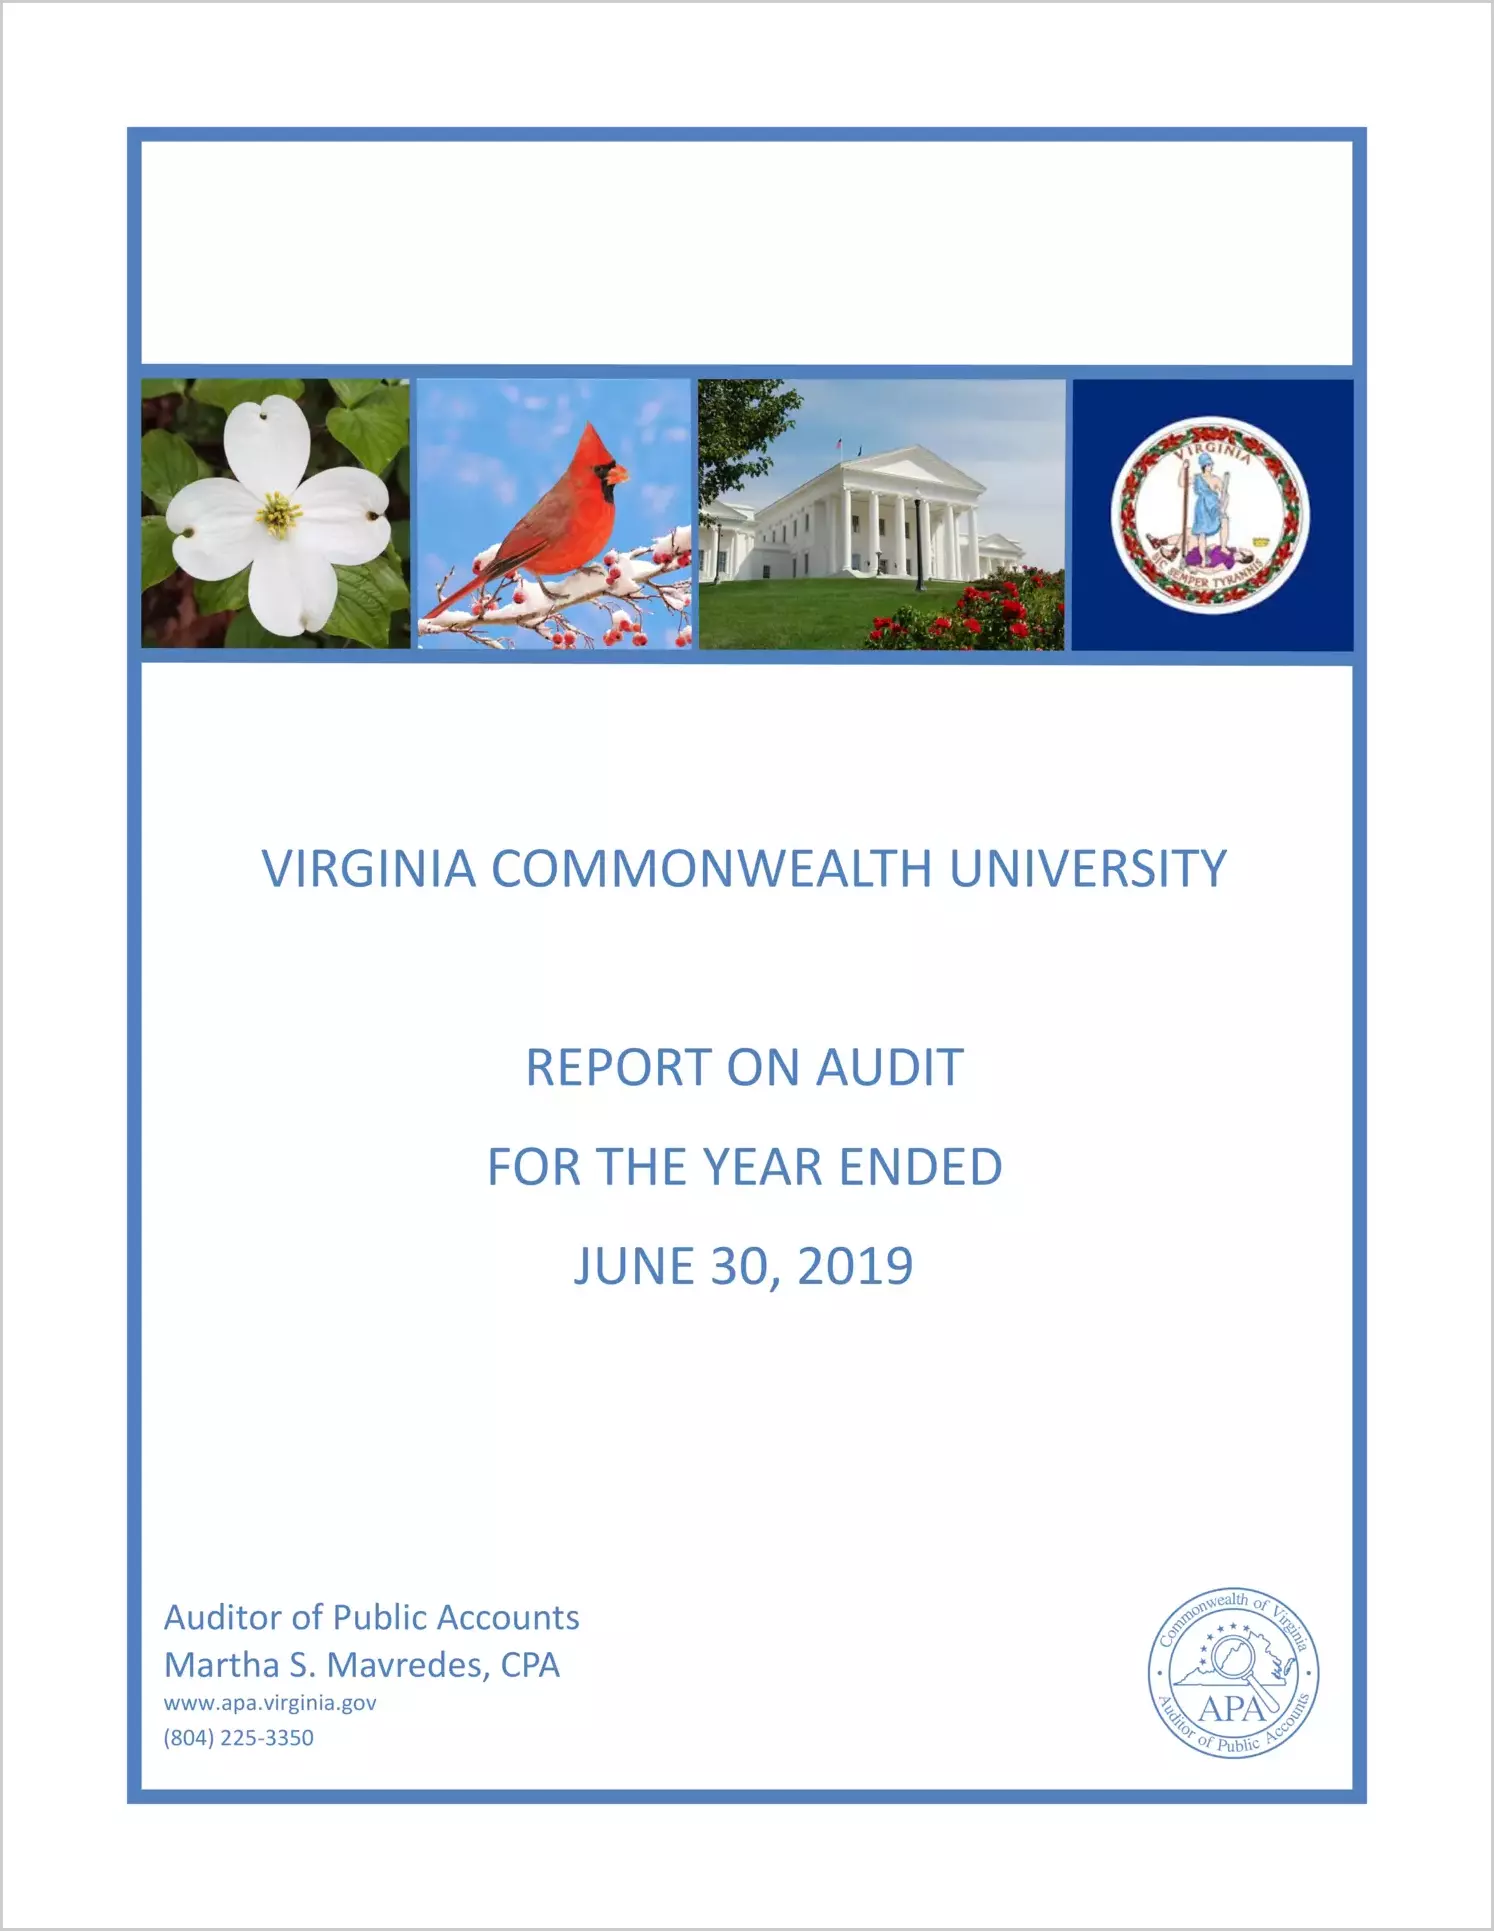 Virginia Commonwealth University for the year ended June 30, 2019